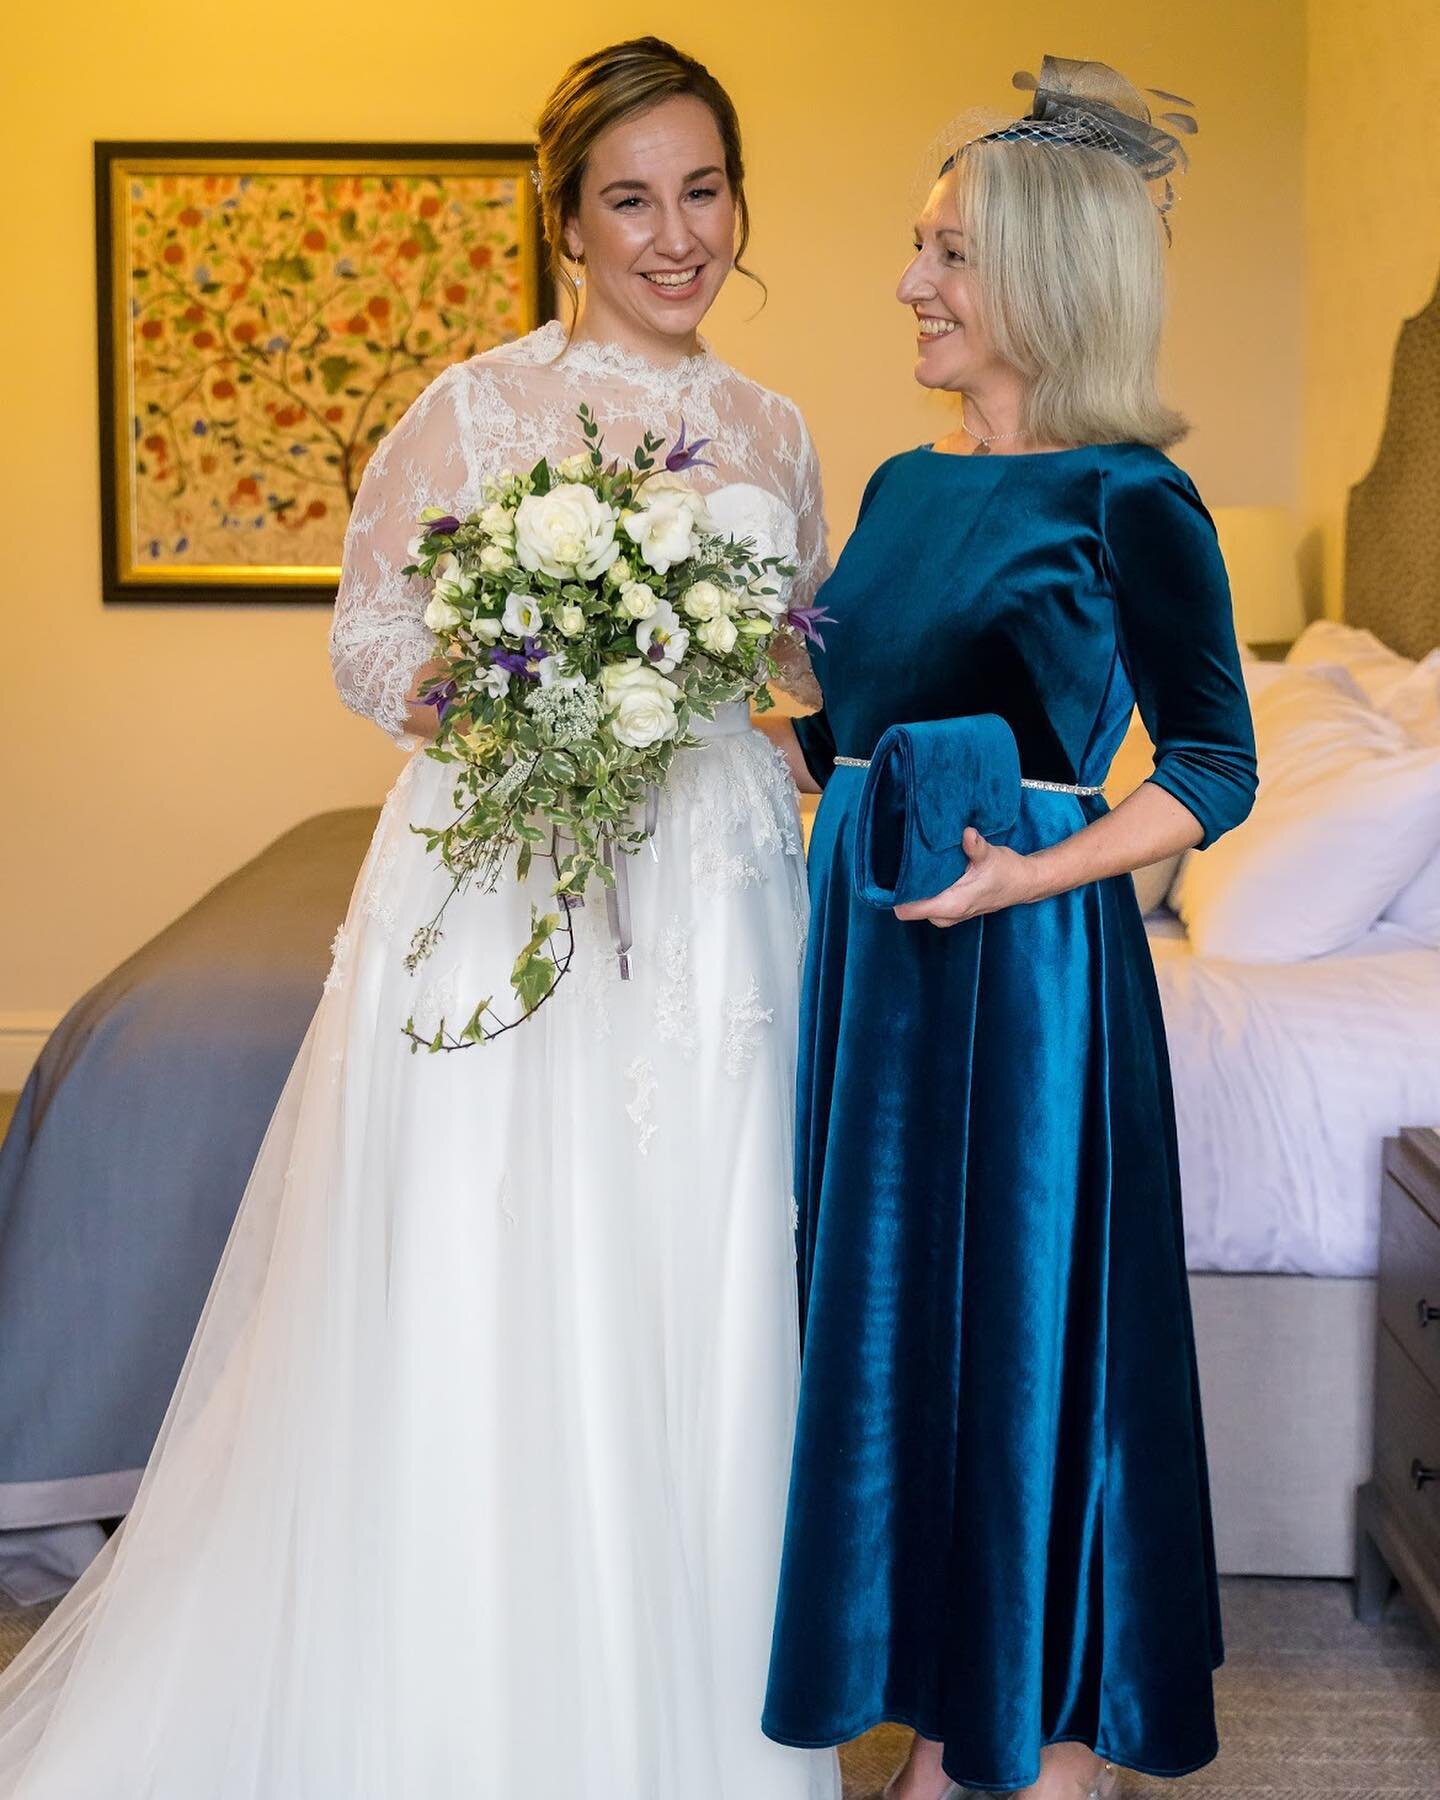 Victoria and her mum Margaret 💙 both ladies in their beautiful bespoke dresses created by the team. If we have made a mother of the bride/ groom outfit for yourself or a family member, we would love to see the photos and be able to use them on a new